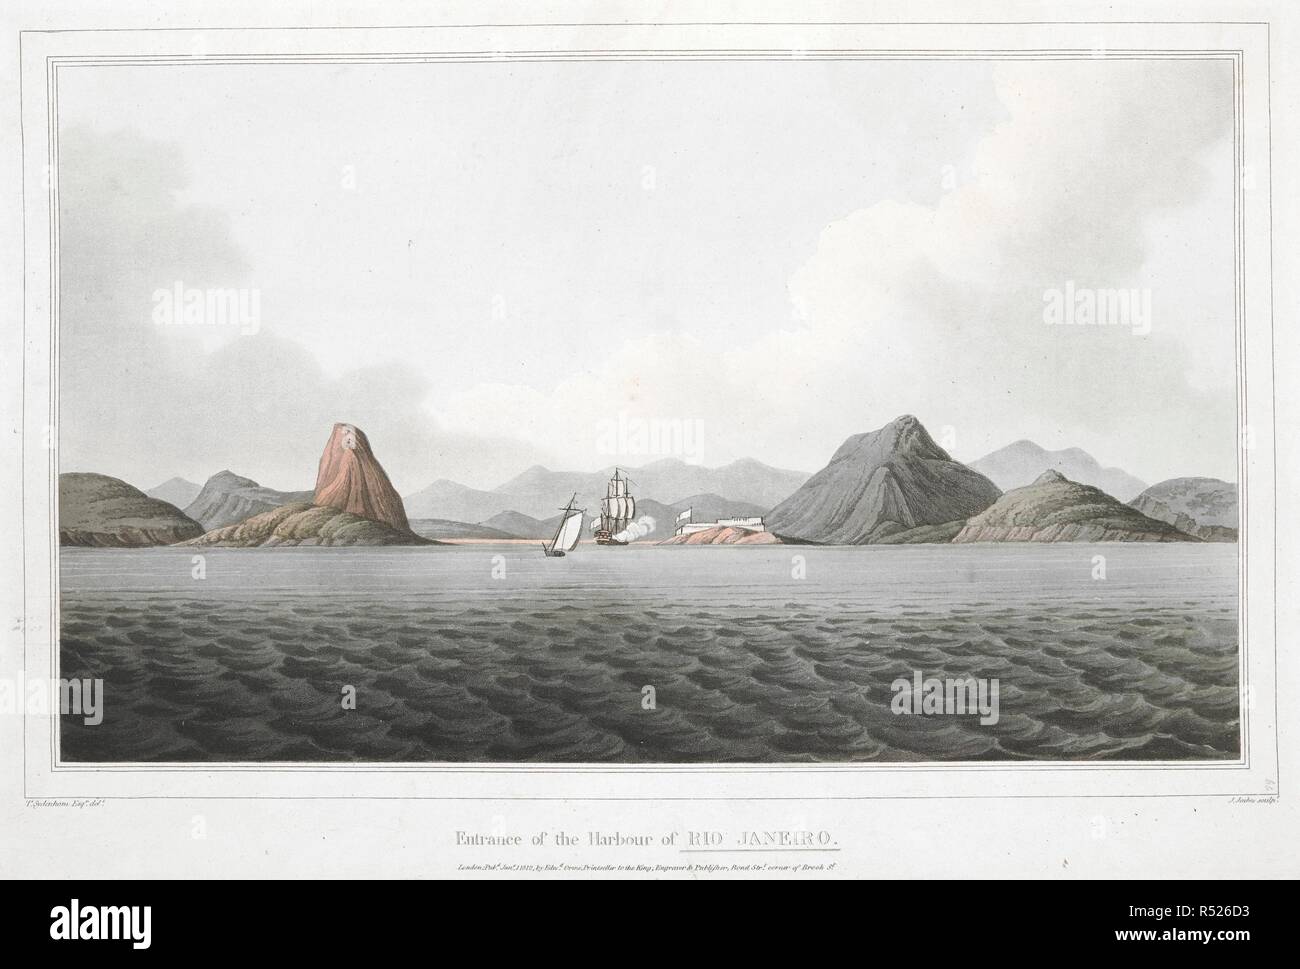 Two ships sailing and the entrance to Guanabara Bay, with Sugar Loaf Mountain (PÃ£o de AÃ§Ãºcar) on the left and a fort at the feet of the Jurujuba promontory on the right; mountains of Sierra del Mar in the background . Entrance of the Harbour of RIO JANEIRO. London : Pubd. Jan.y 1. 1812. by Edw.d Orme, Printseller to the King. Engraver & Publisher, Bond Str.t corner of Brook St., [January 1 1812]. Hand-coloured aquatint and etching. Source: Maps K.Top.124.59.b. Language: English. Author: Jeakes, J. Stock Photo